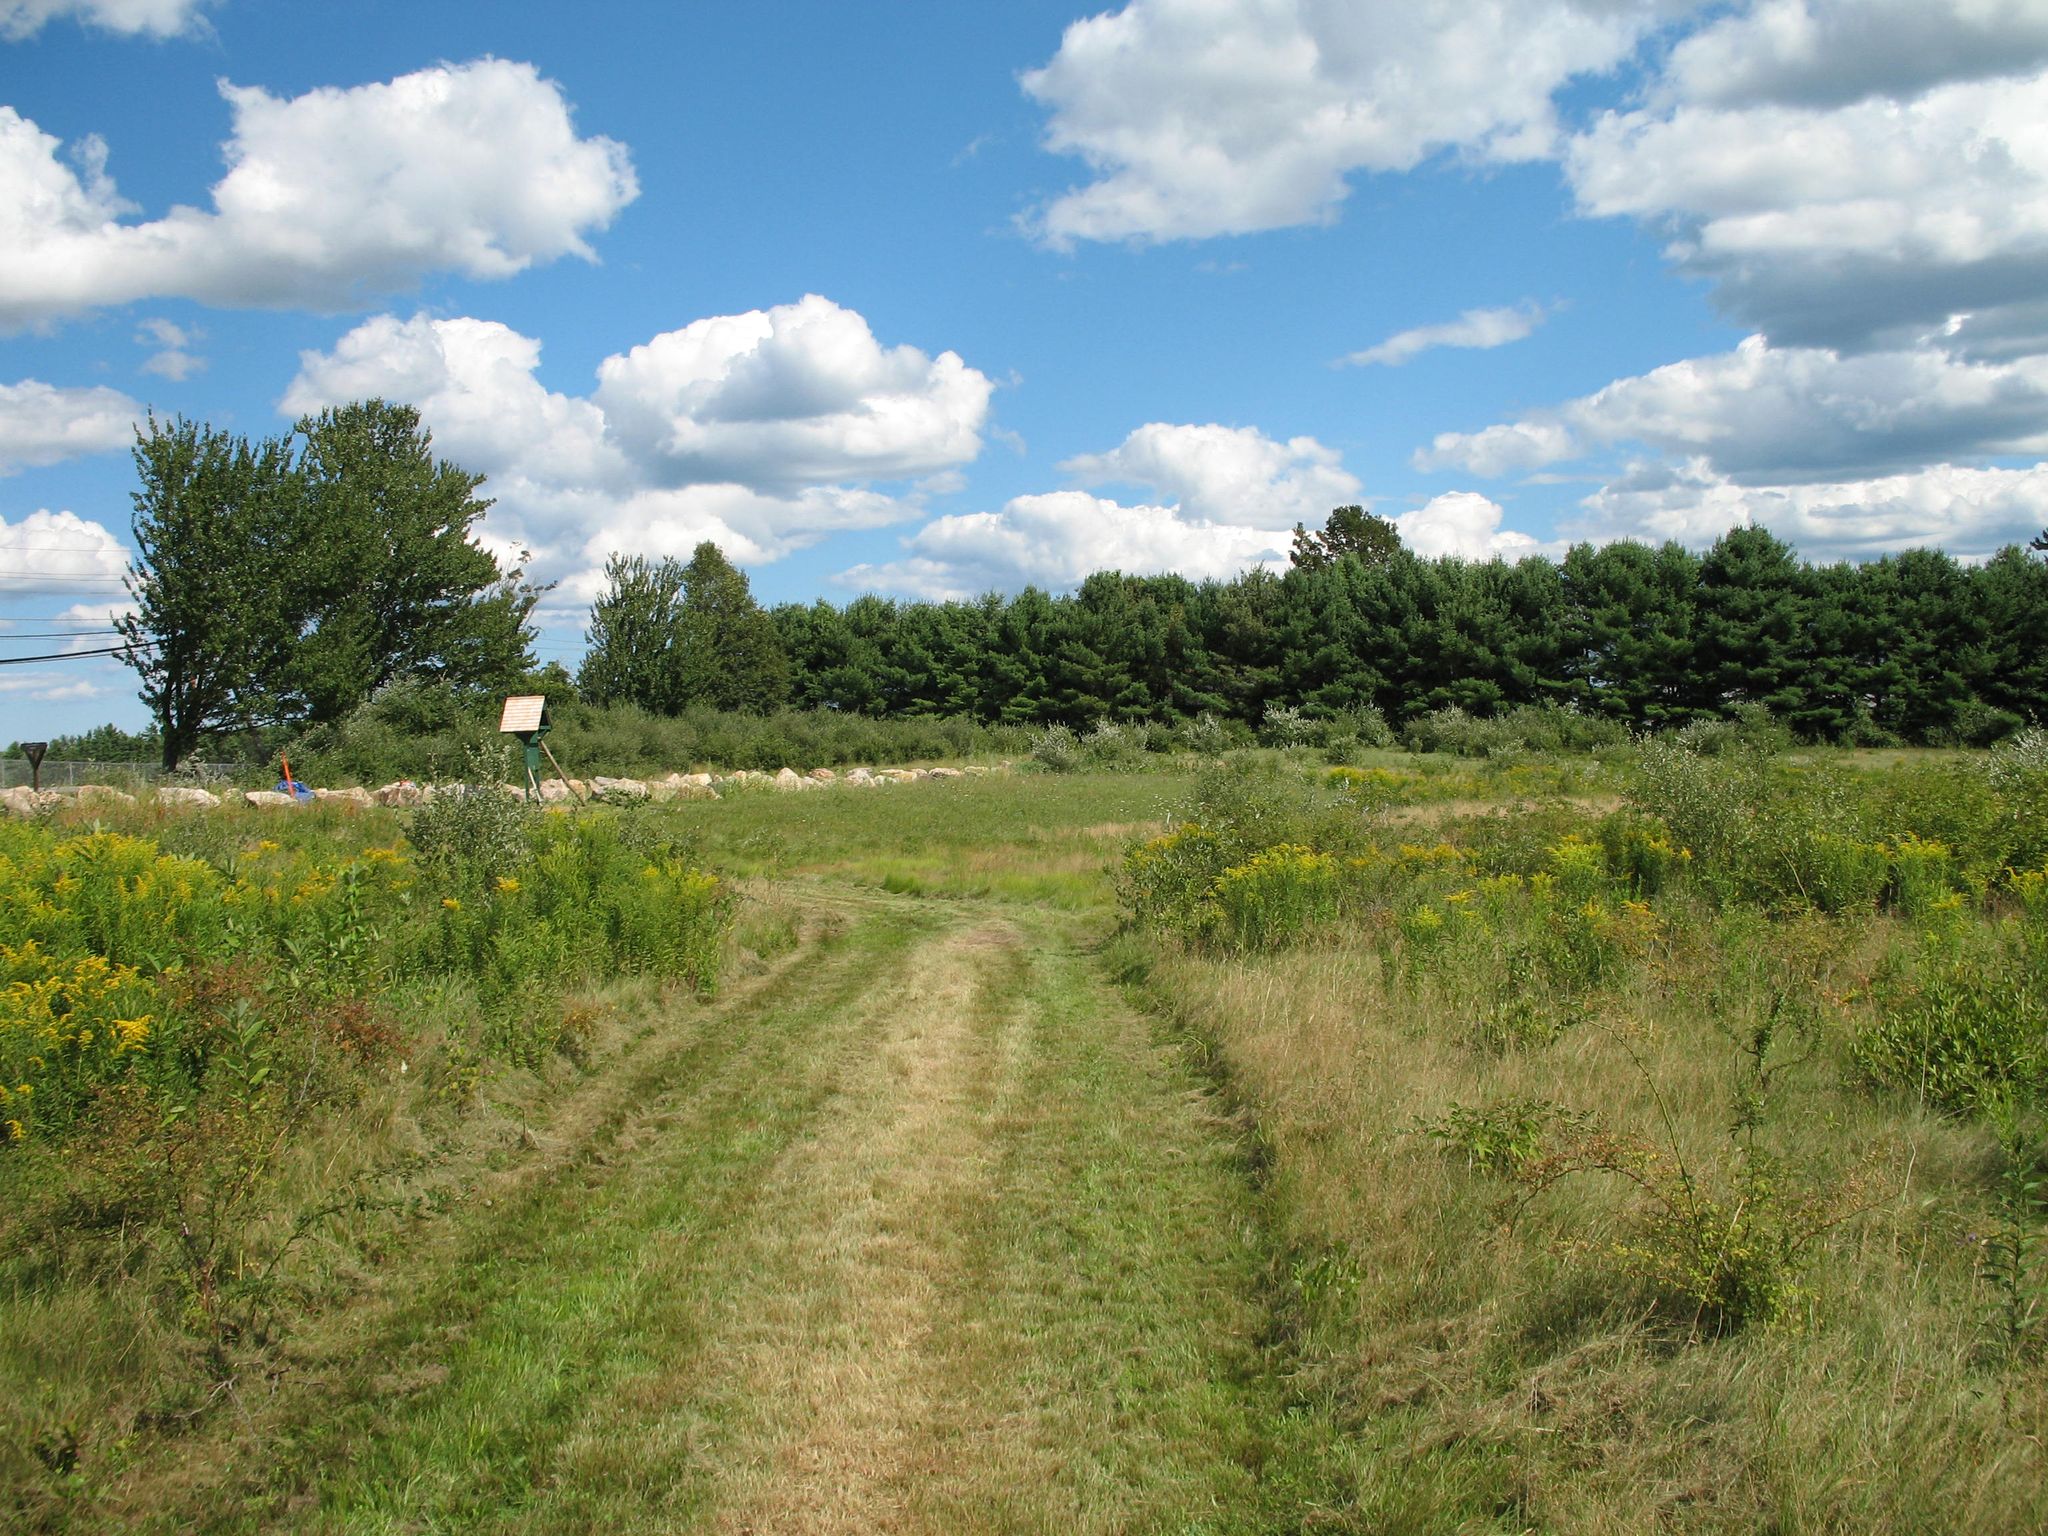 A mowed trail through a green meadow with a forest behind.